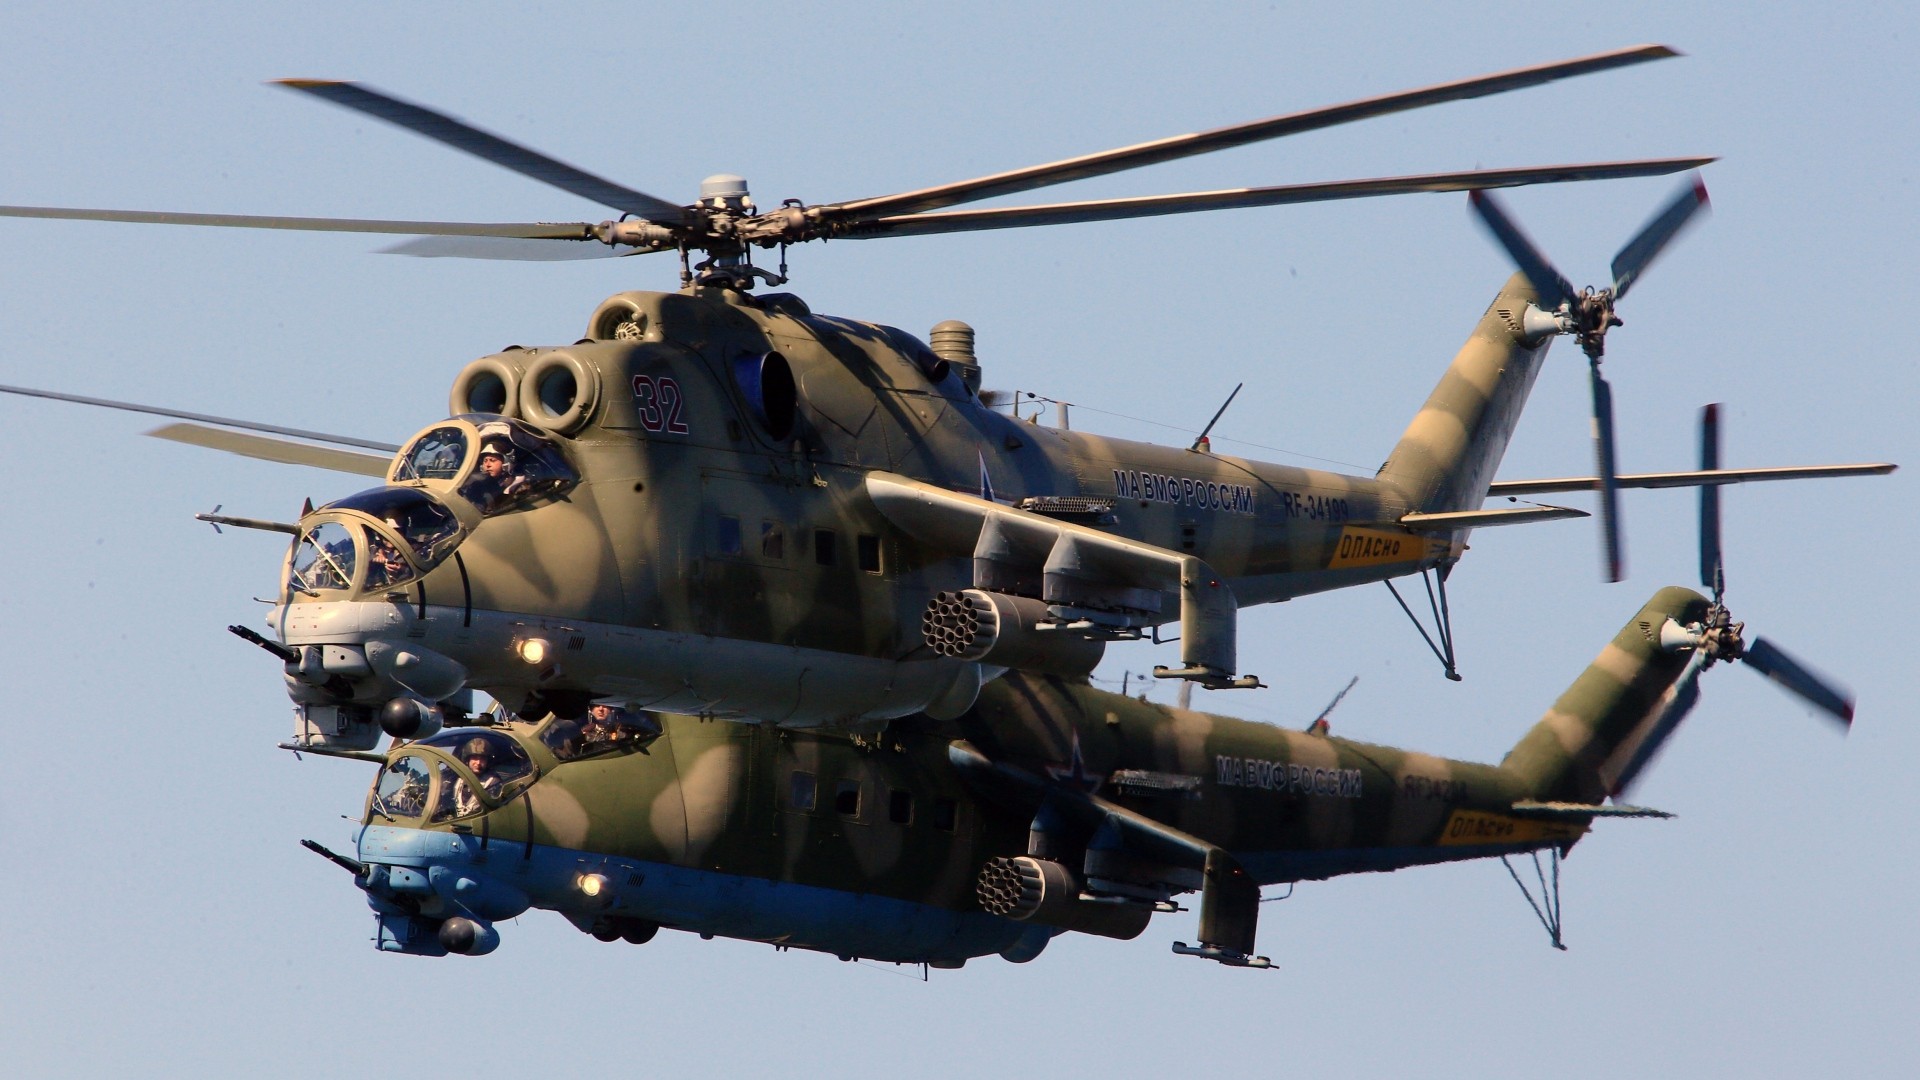 General 1920x1080 helicopters vehicle military military vehicle Mil Mi-24 Russian Army Russian/Soviet aircraft military aircraft aircraft pilot attack helicopters men Russian Air Force Formation Mil Helicopters